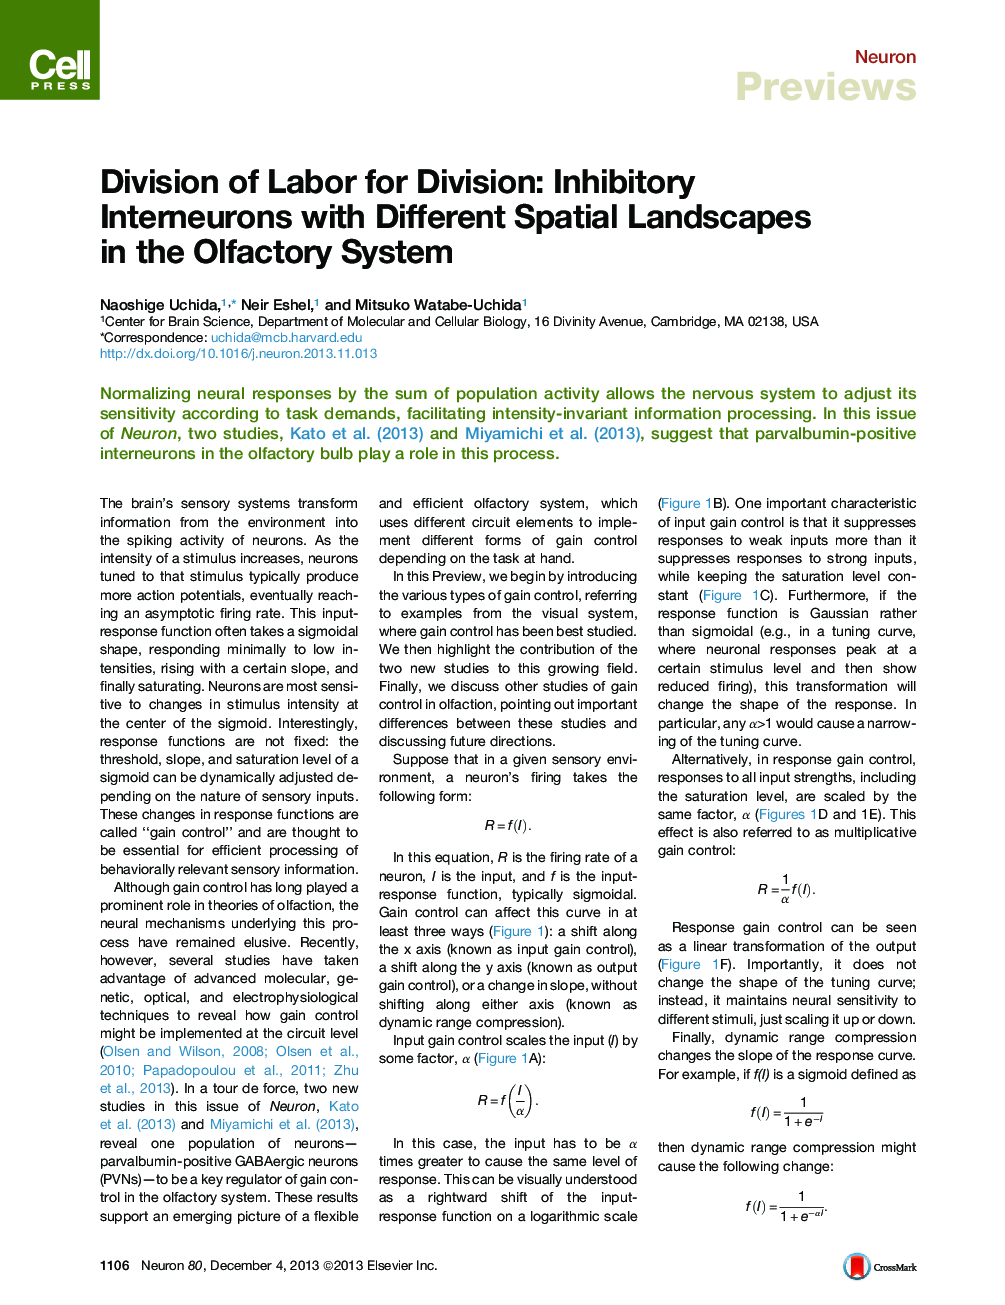 Division of Labor for Division: Inhibitory Interneurons with Different Spatial Landscapes in the Olfactory System